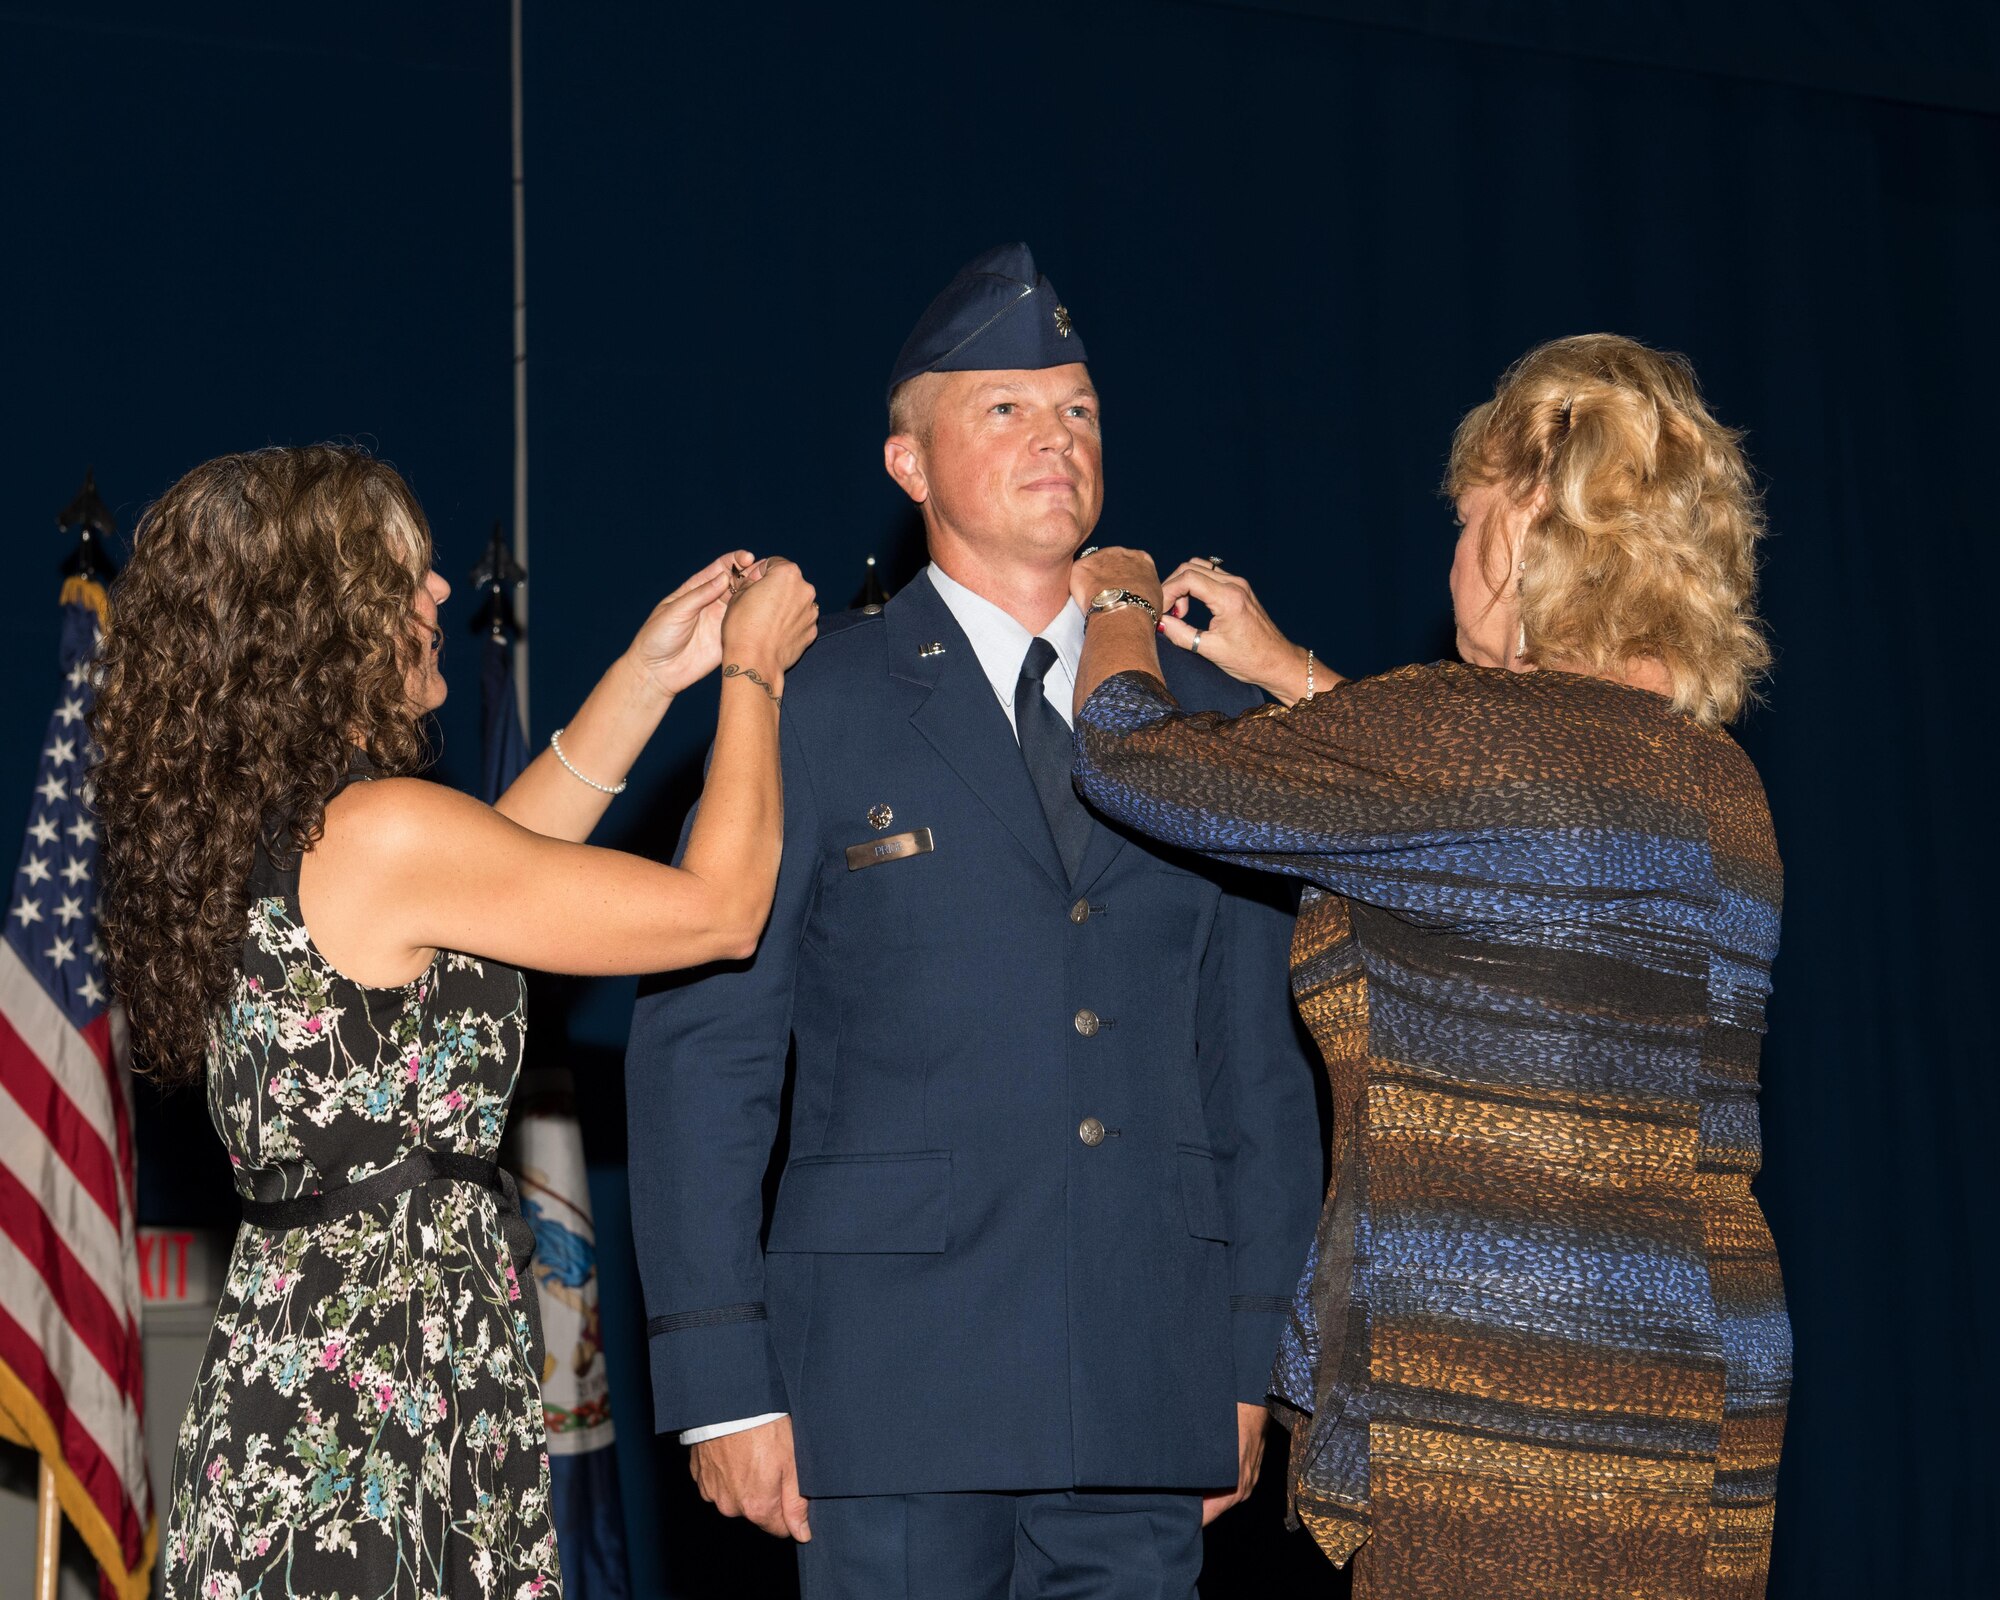 Lt. Col. Jason R. Price is promoted to the rank of colonel.